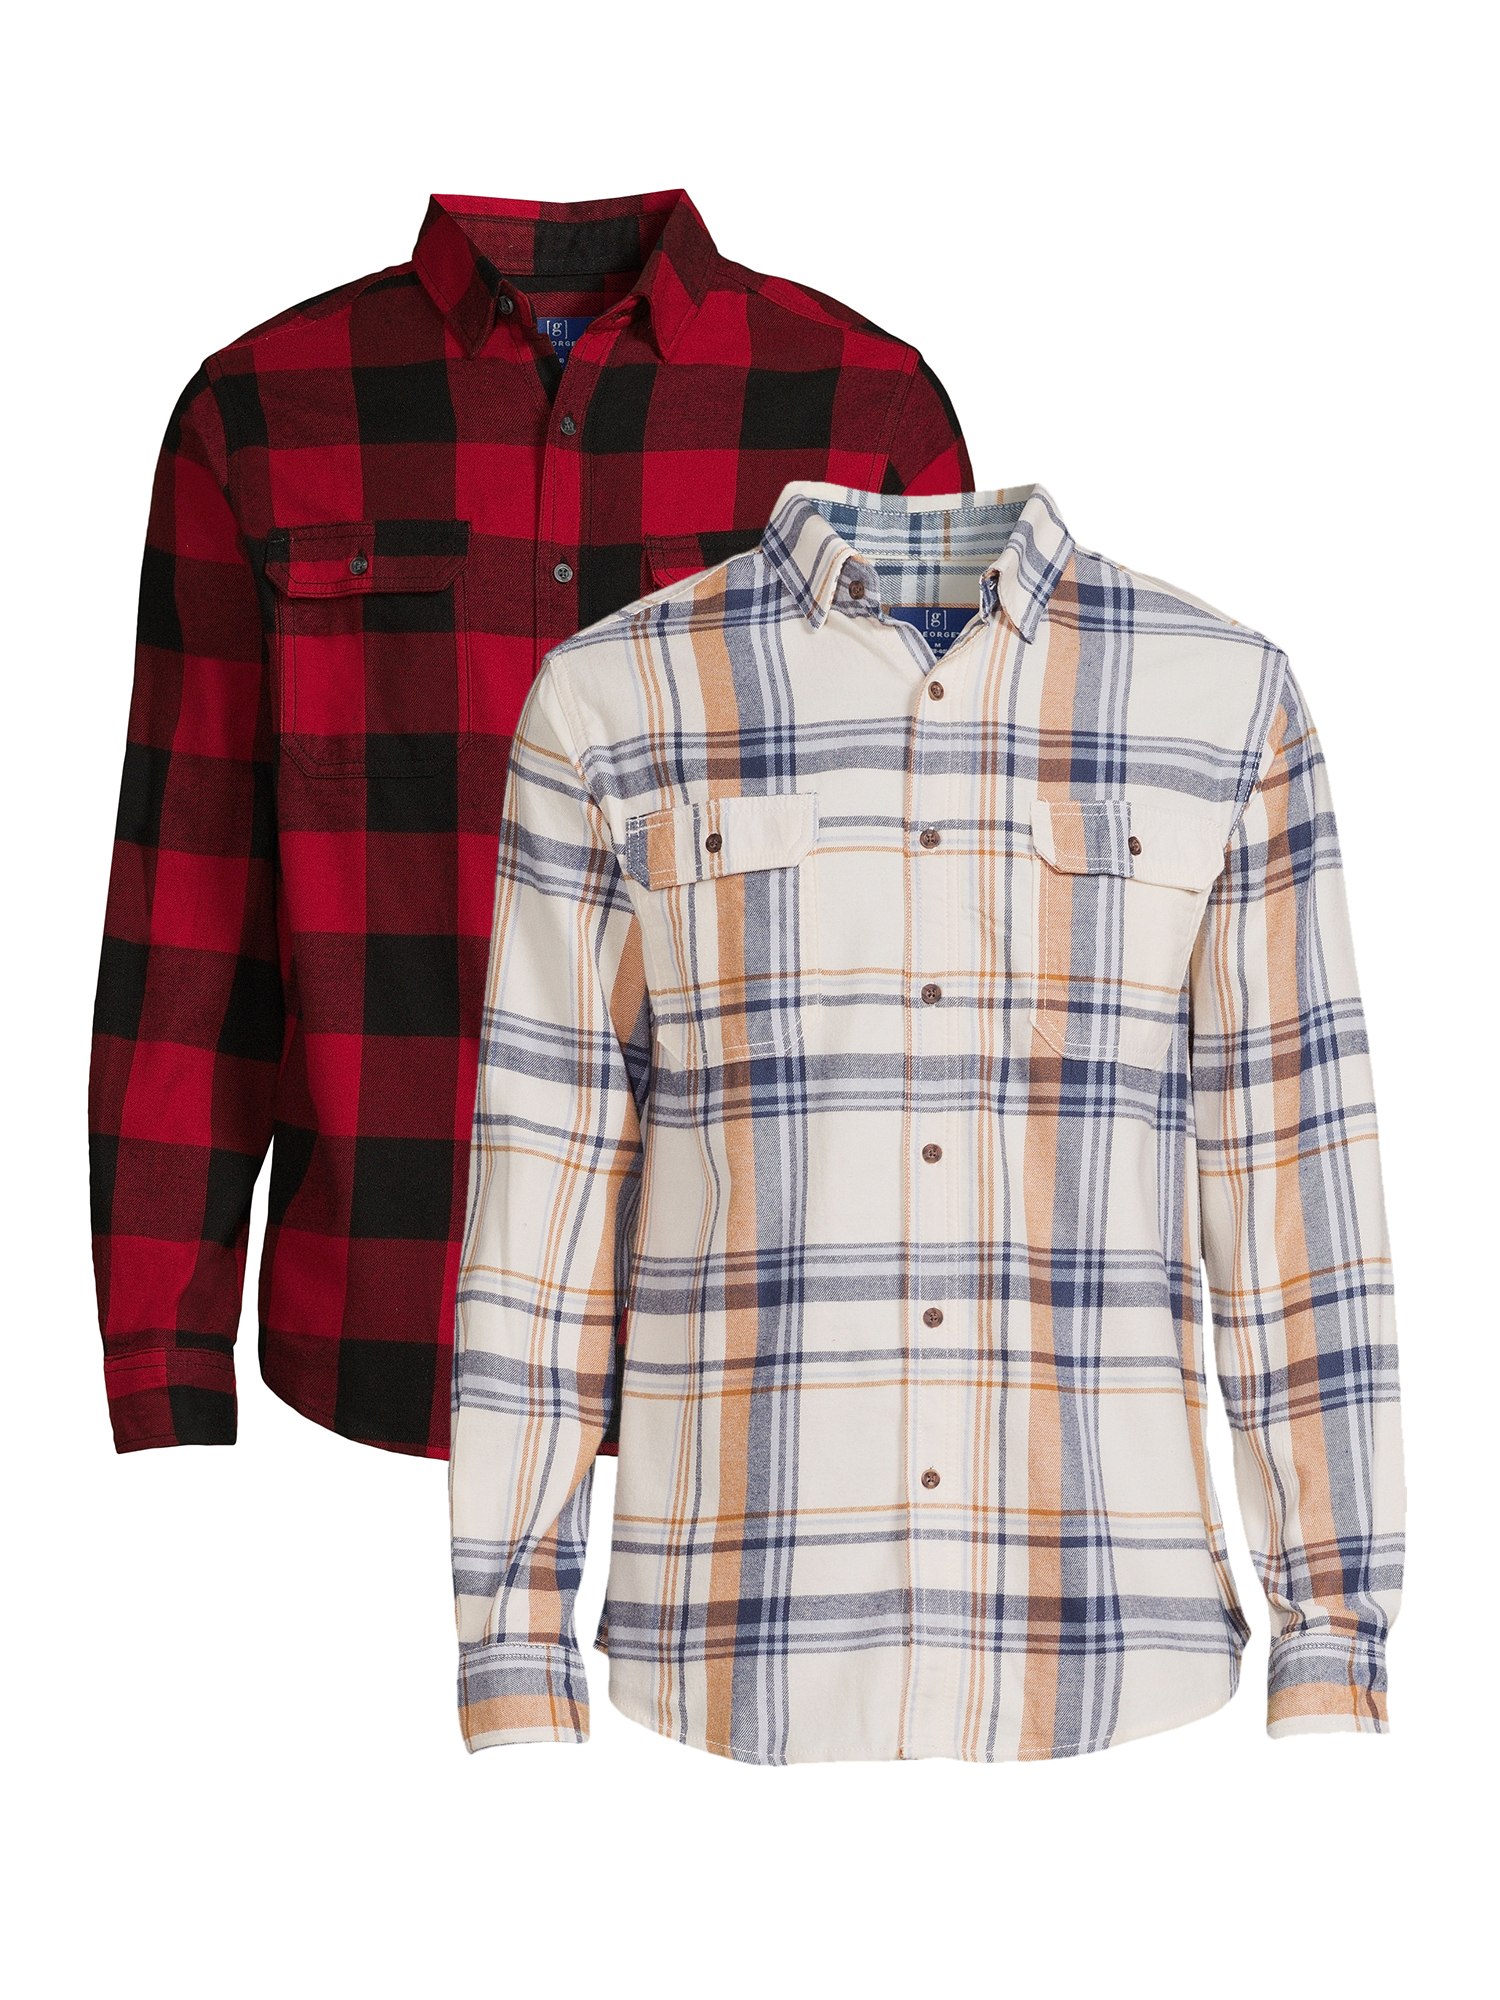 George Men's Long Sleeve Flannel Shirts, 2-Pack, Sizes S-2XL - image 1 of 5